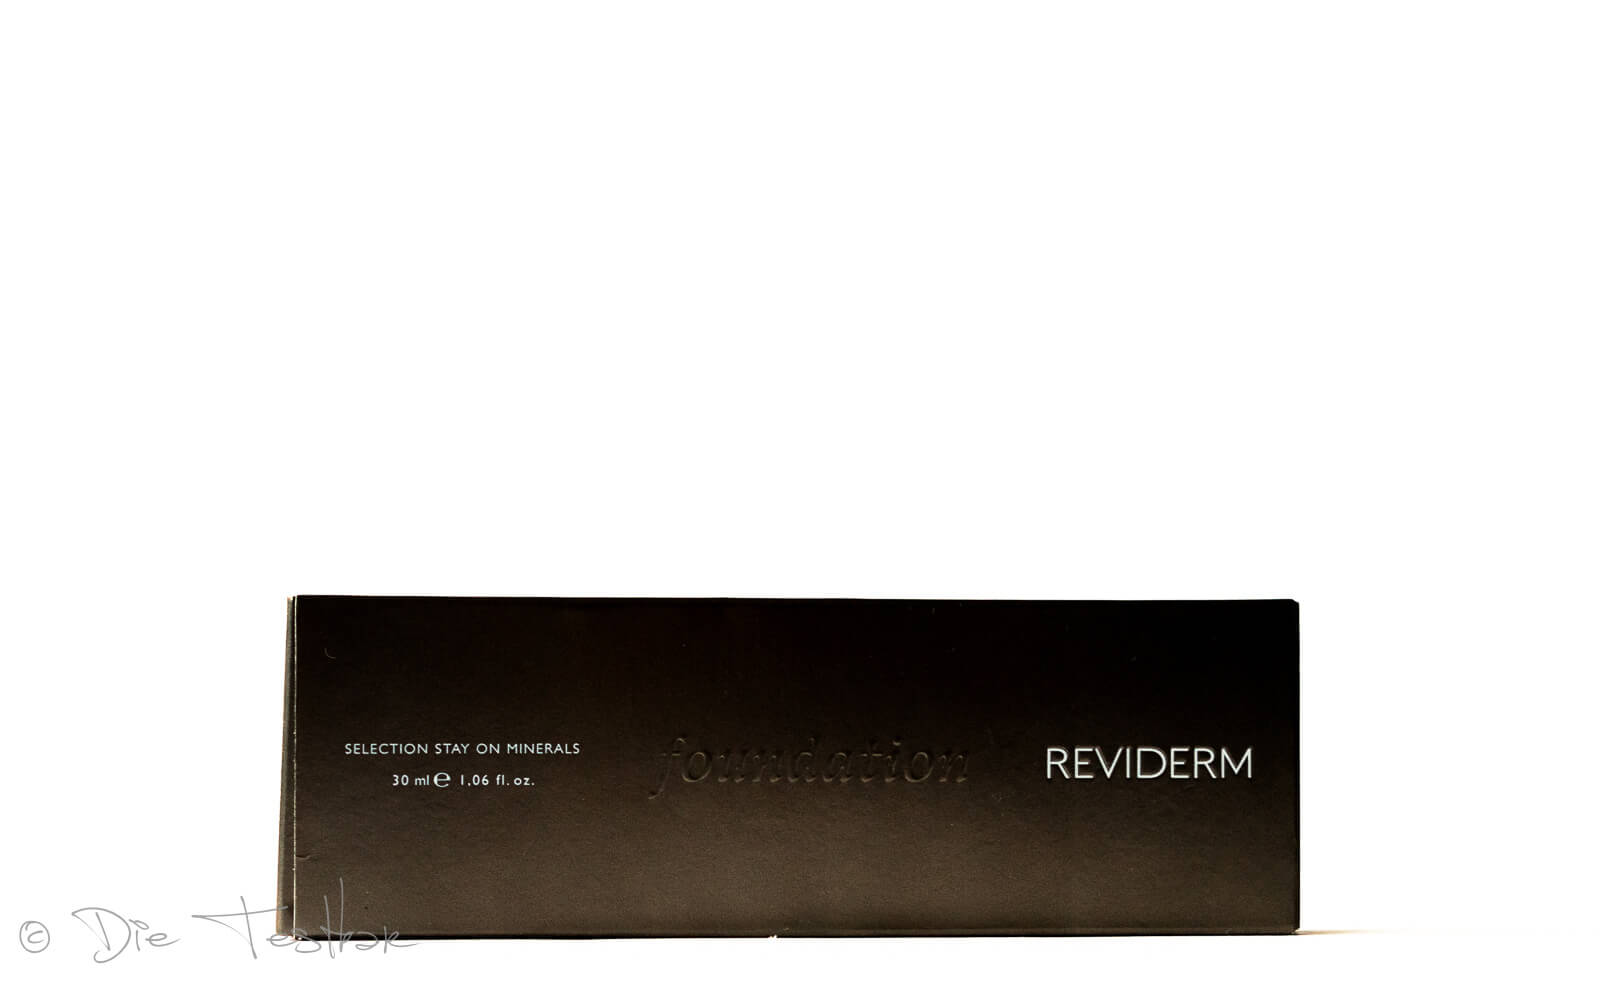 Foundation - Selection Stay On Minerals von Reviderm